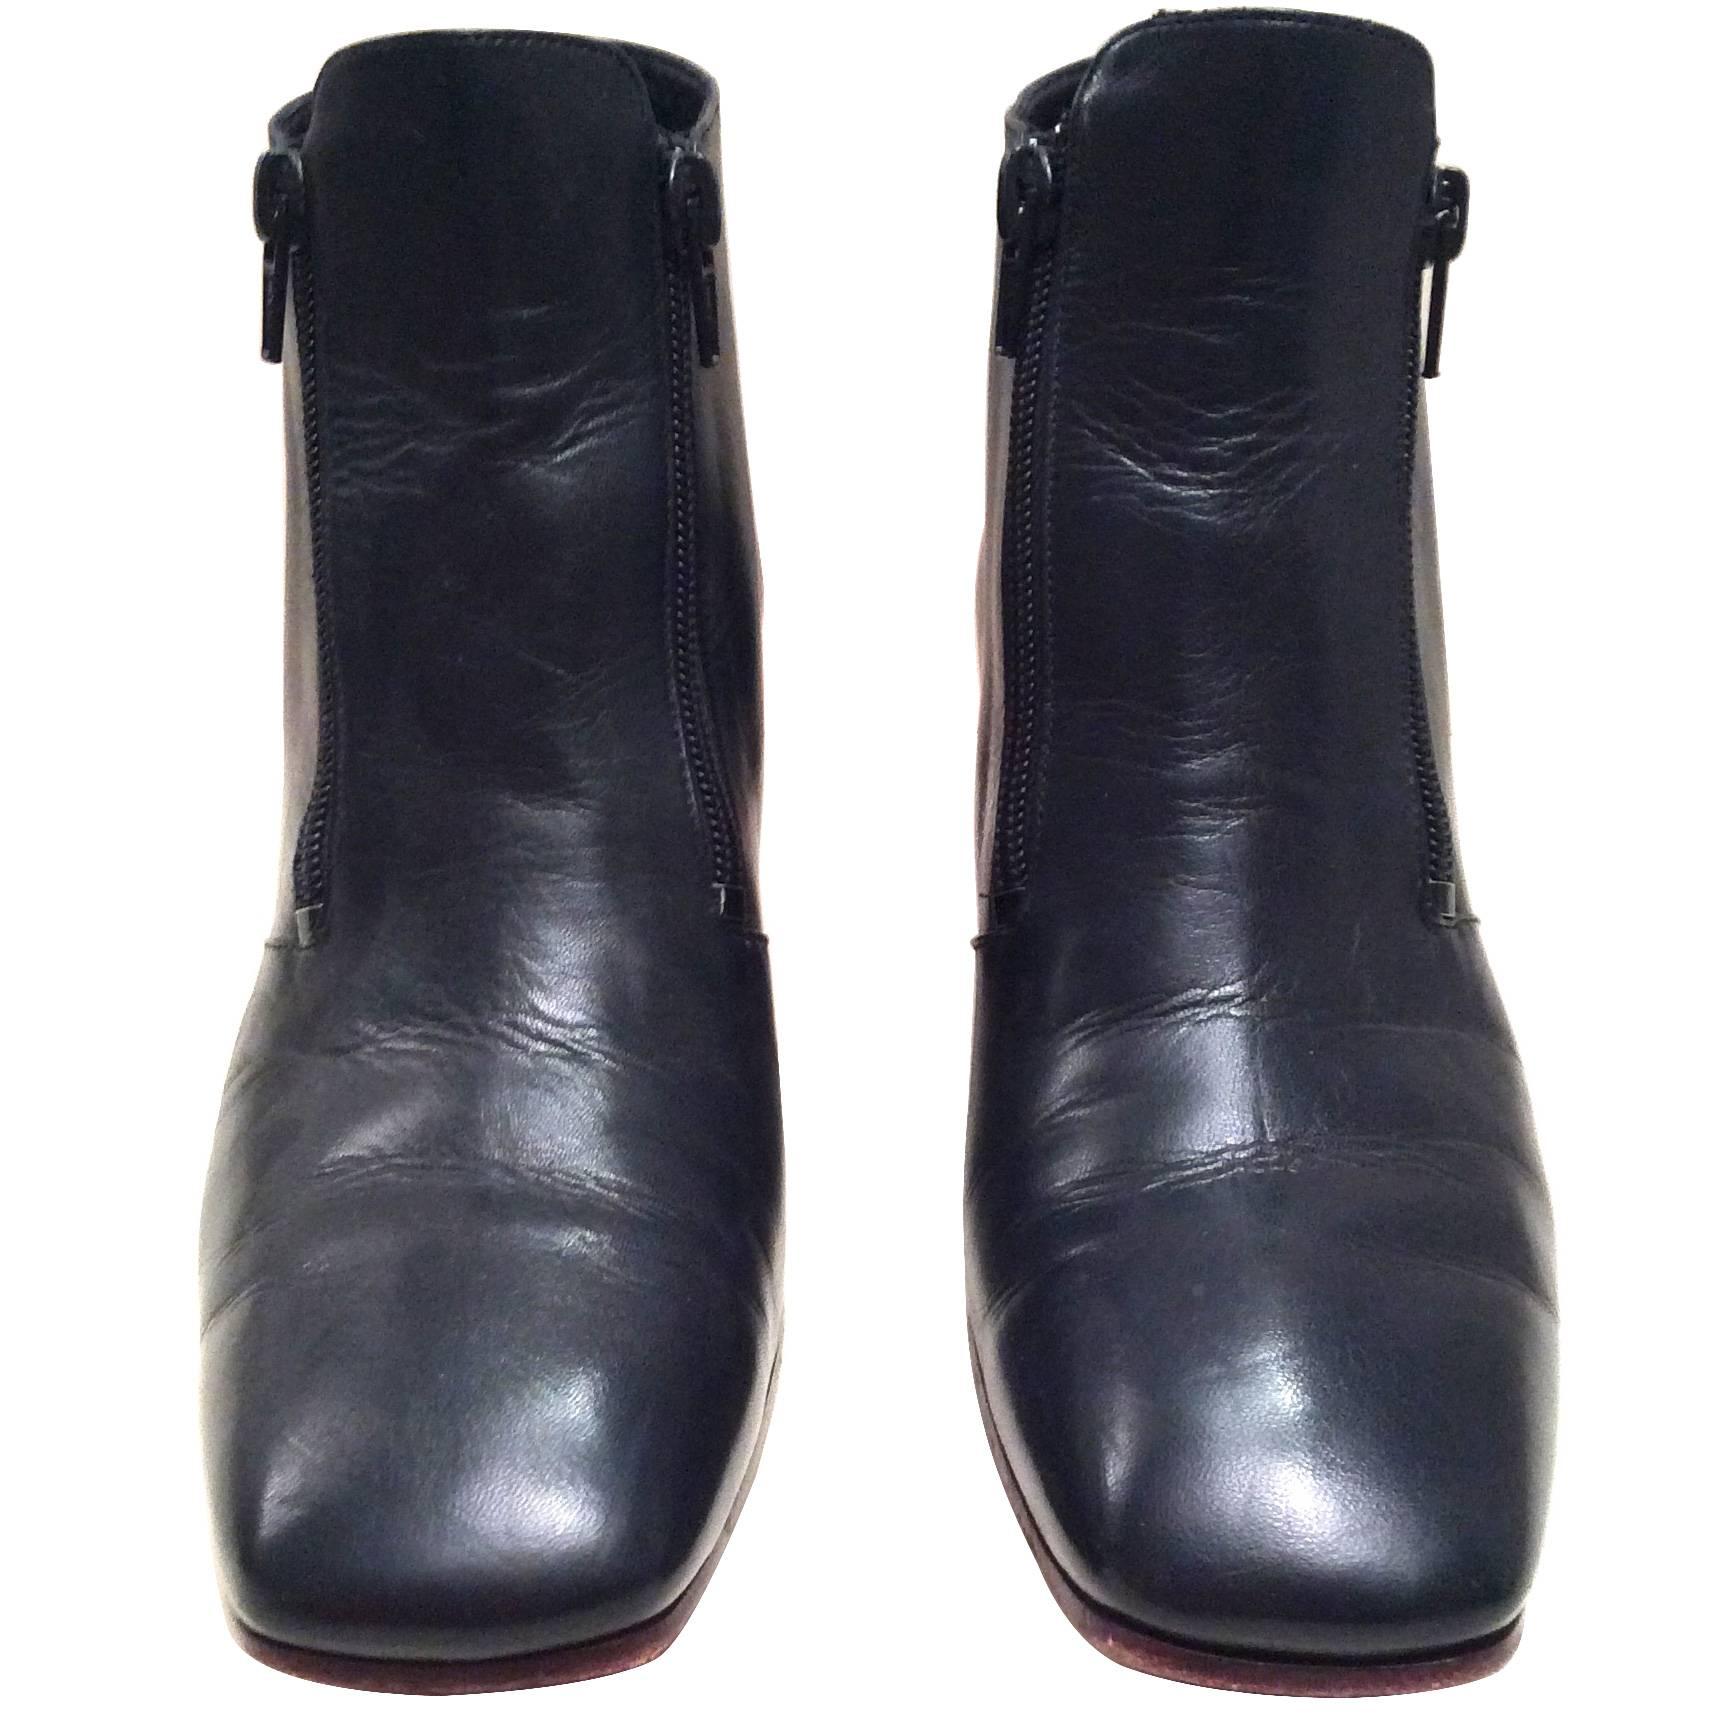 Presented here is a stunning pair of boots from the Celine fashion house. These gently worn navy leather boots are a size 37.5 in their original box. They have a beautiful red plastic type material of a two inch rectangular heel. The boots have two